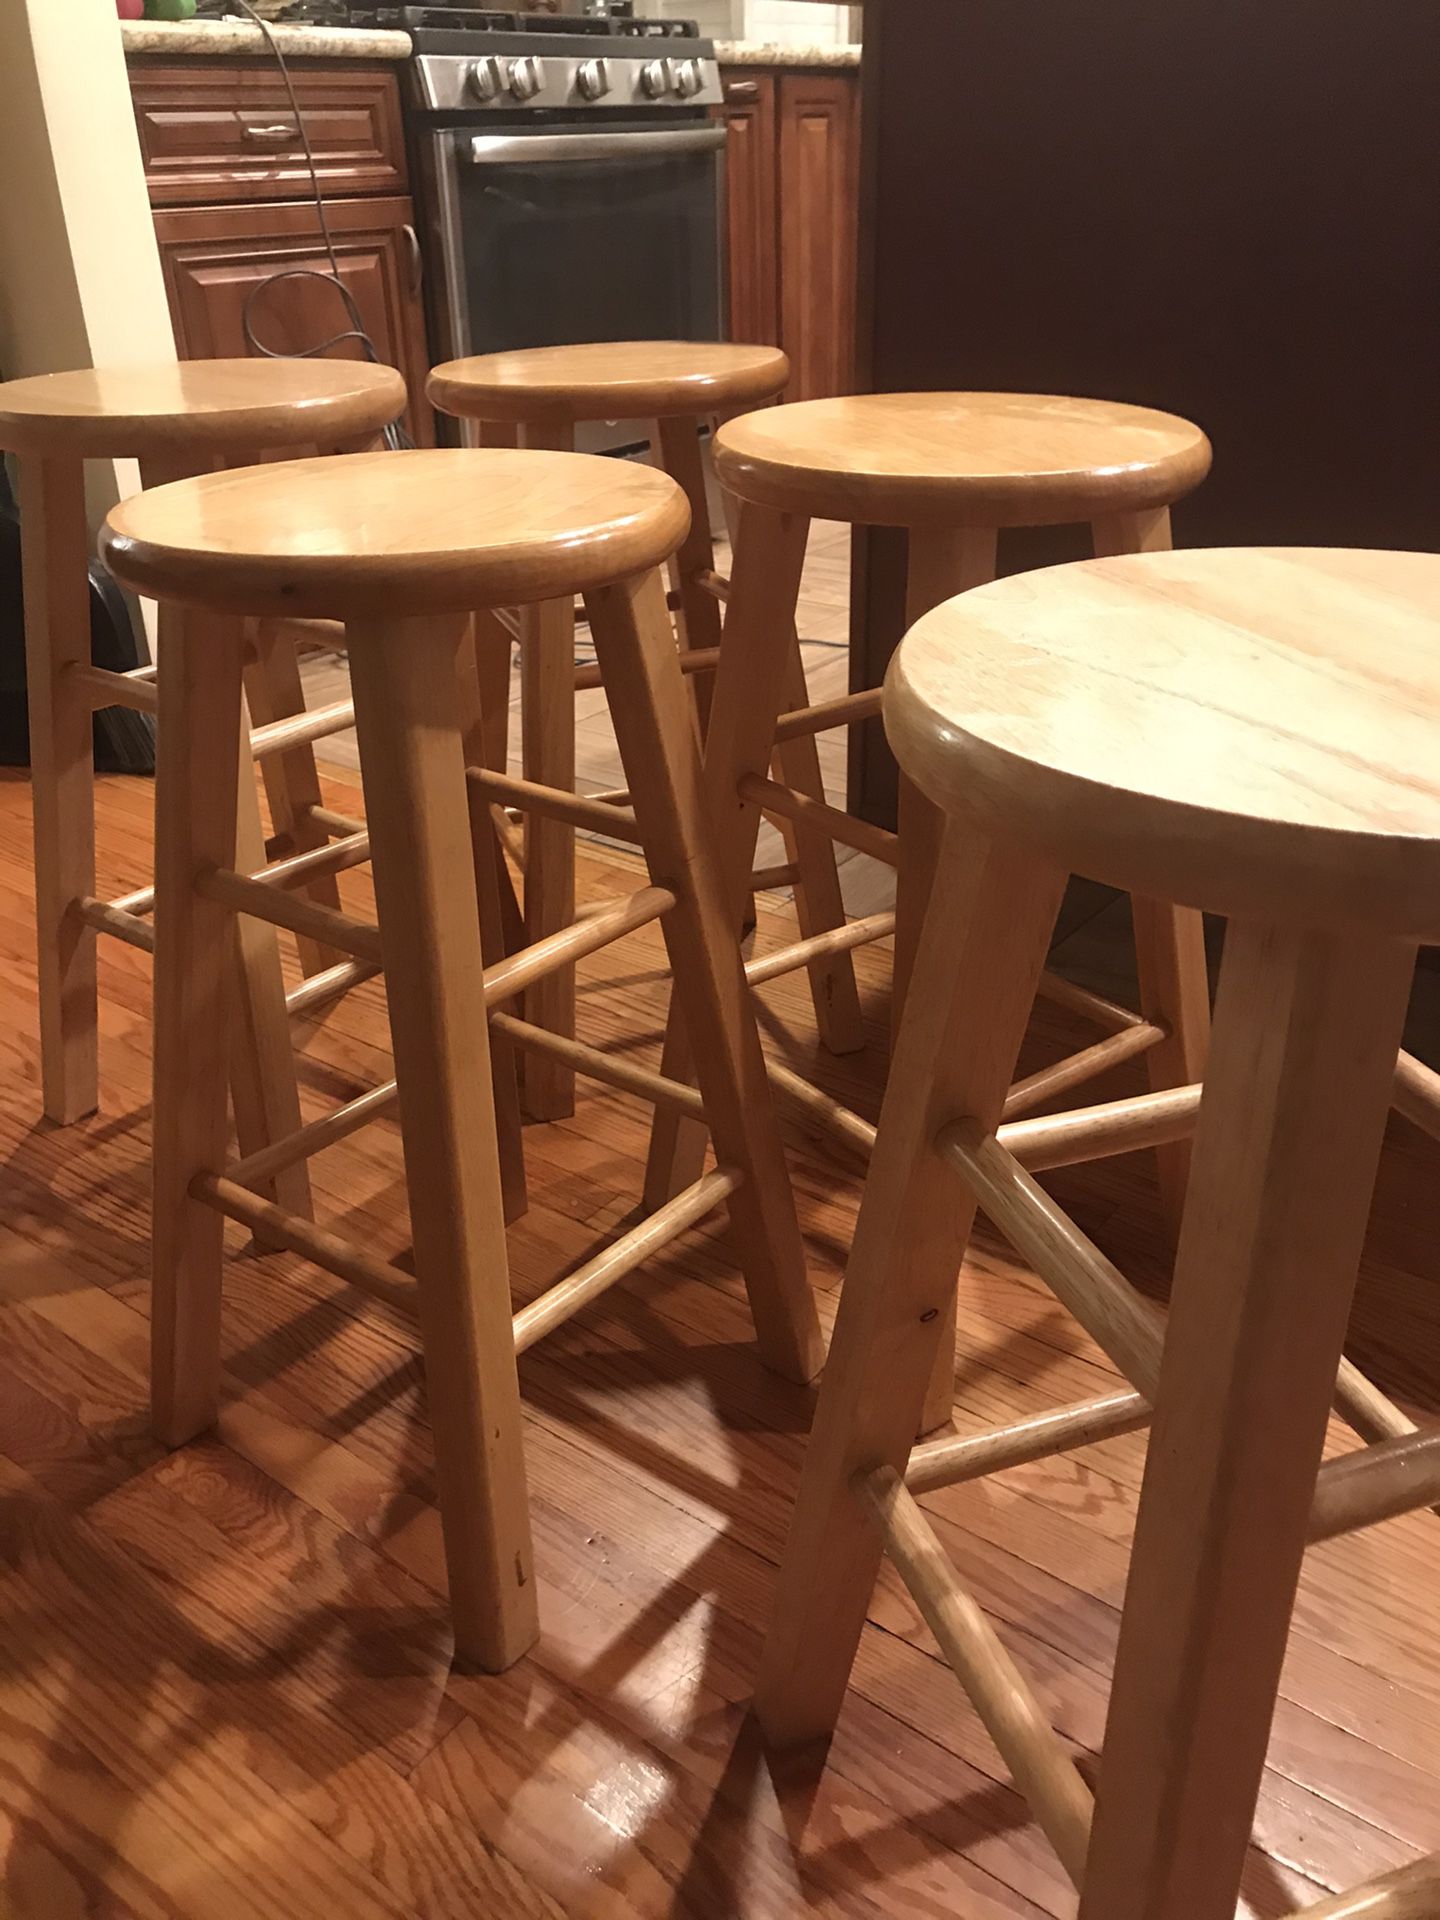 Five used wooden bar stools